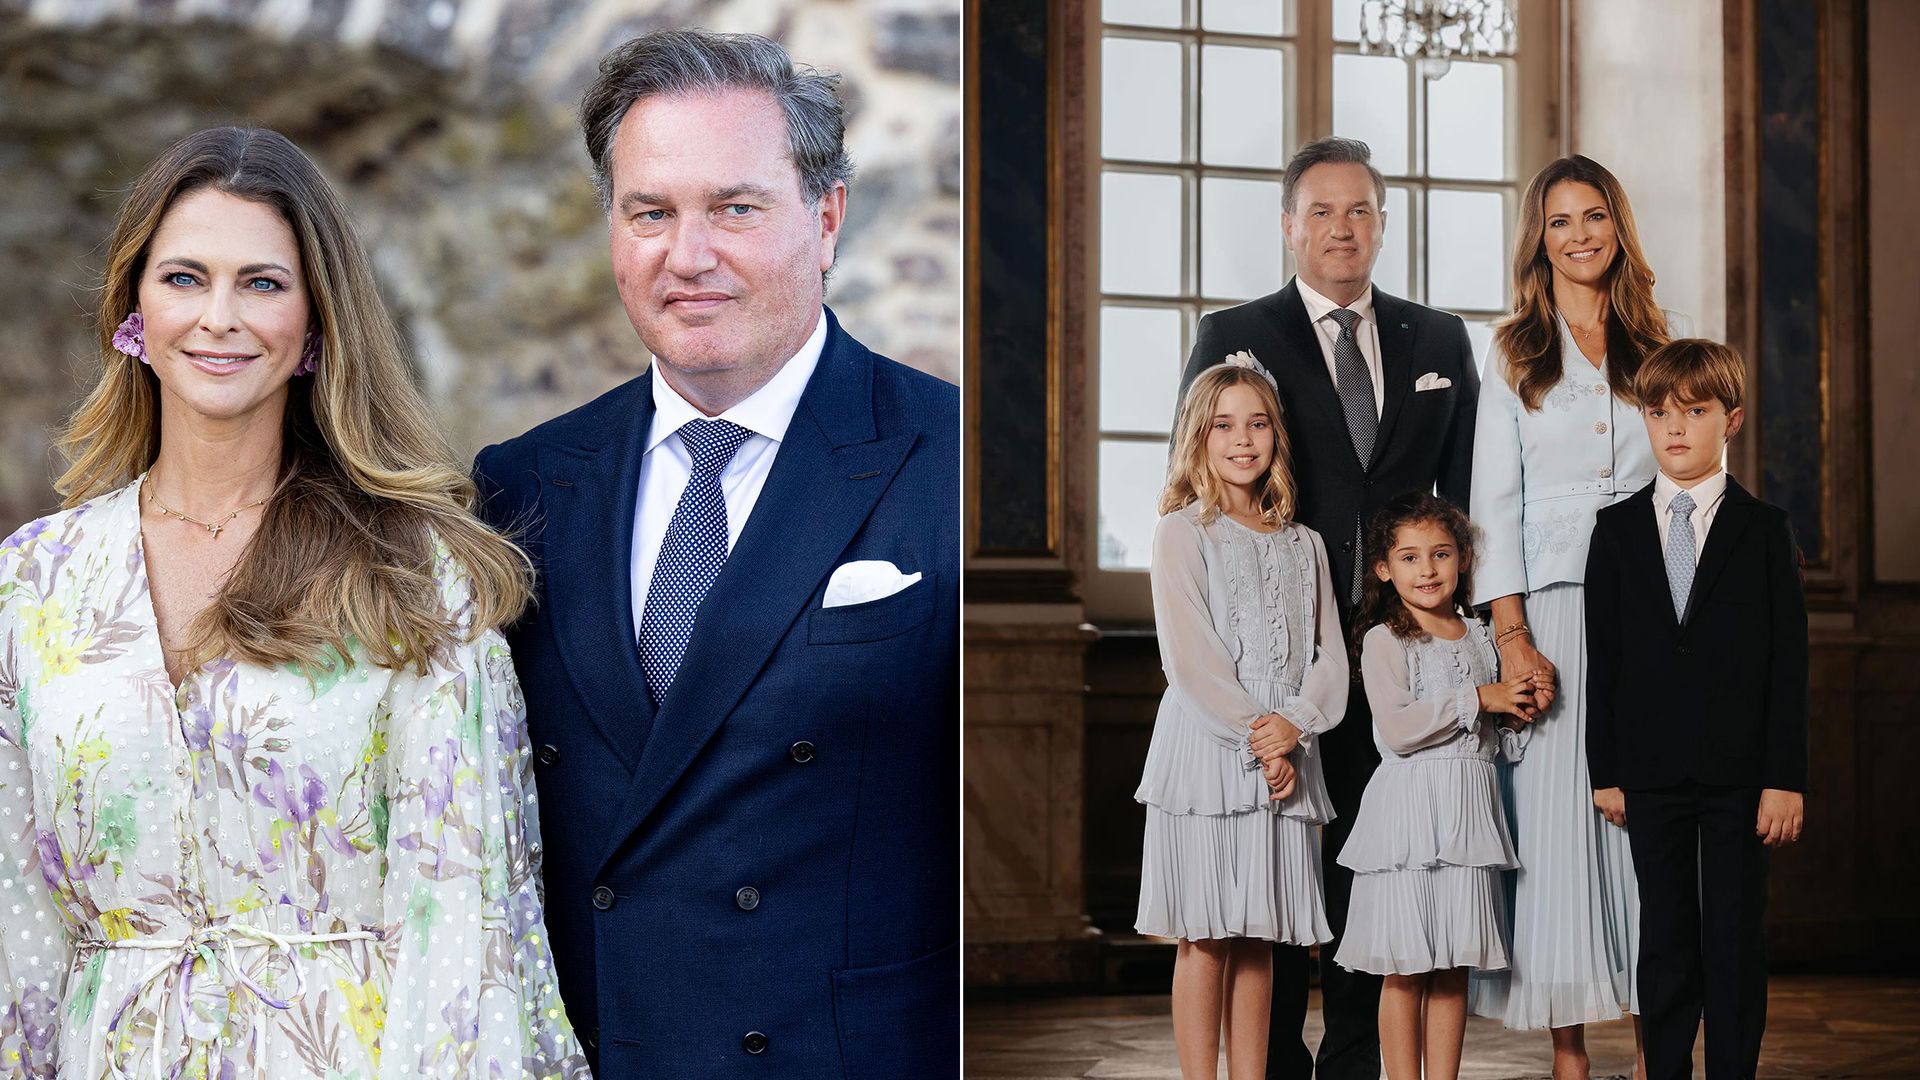 Princess Madeleine and Christopher O'Neill with the children